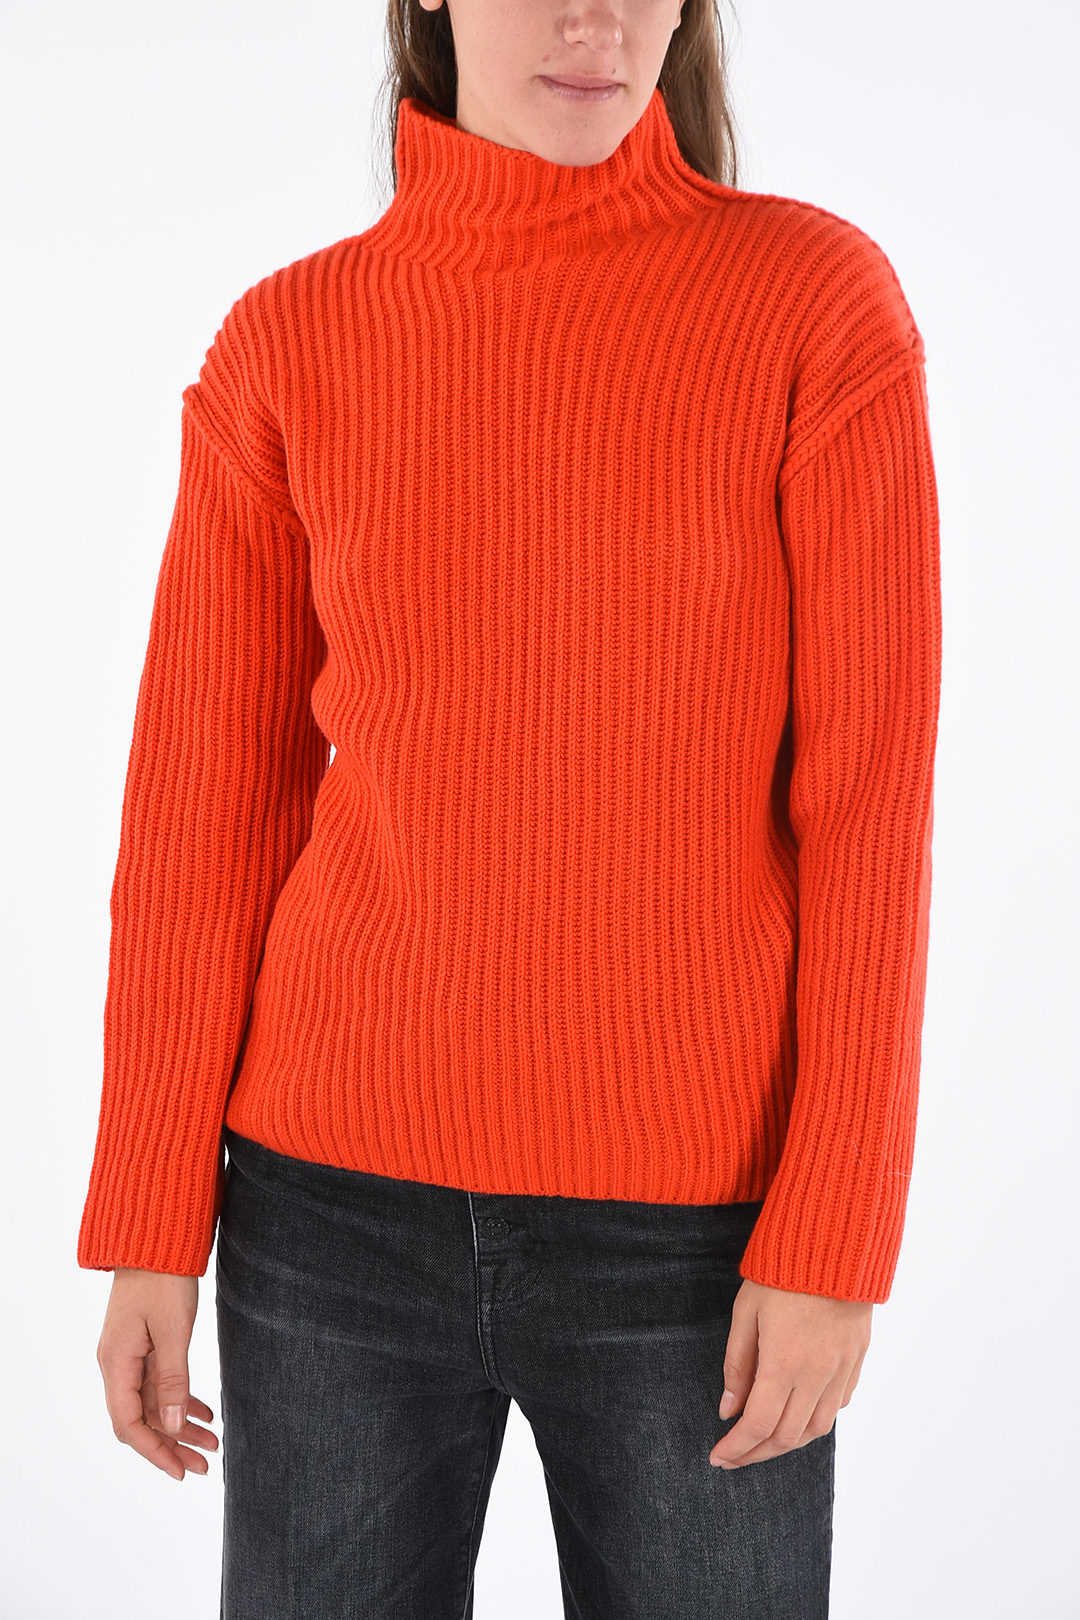 Tory Burch Wool and Cashmere crochet turtle-neck sweater women - Glamood  Outlet